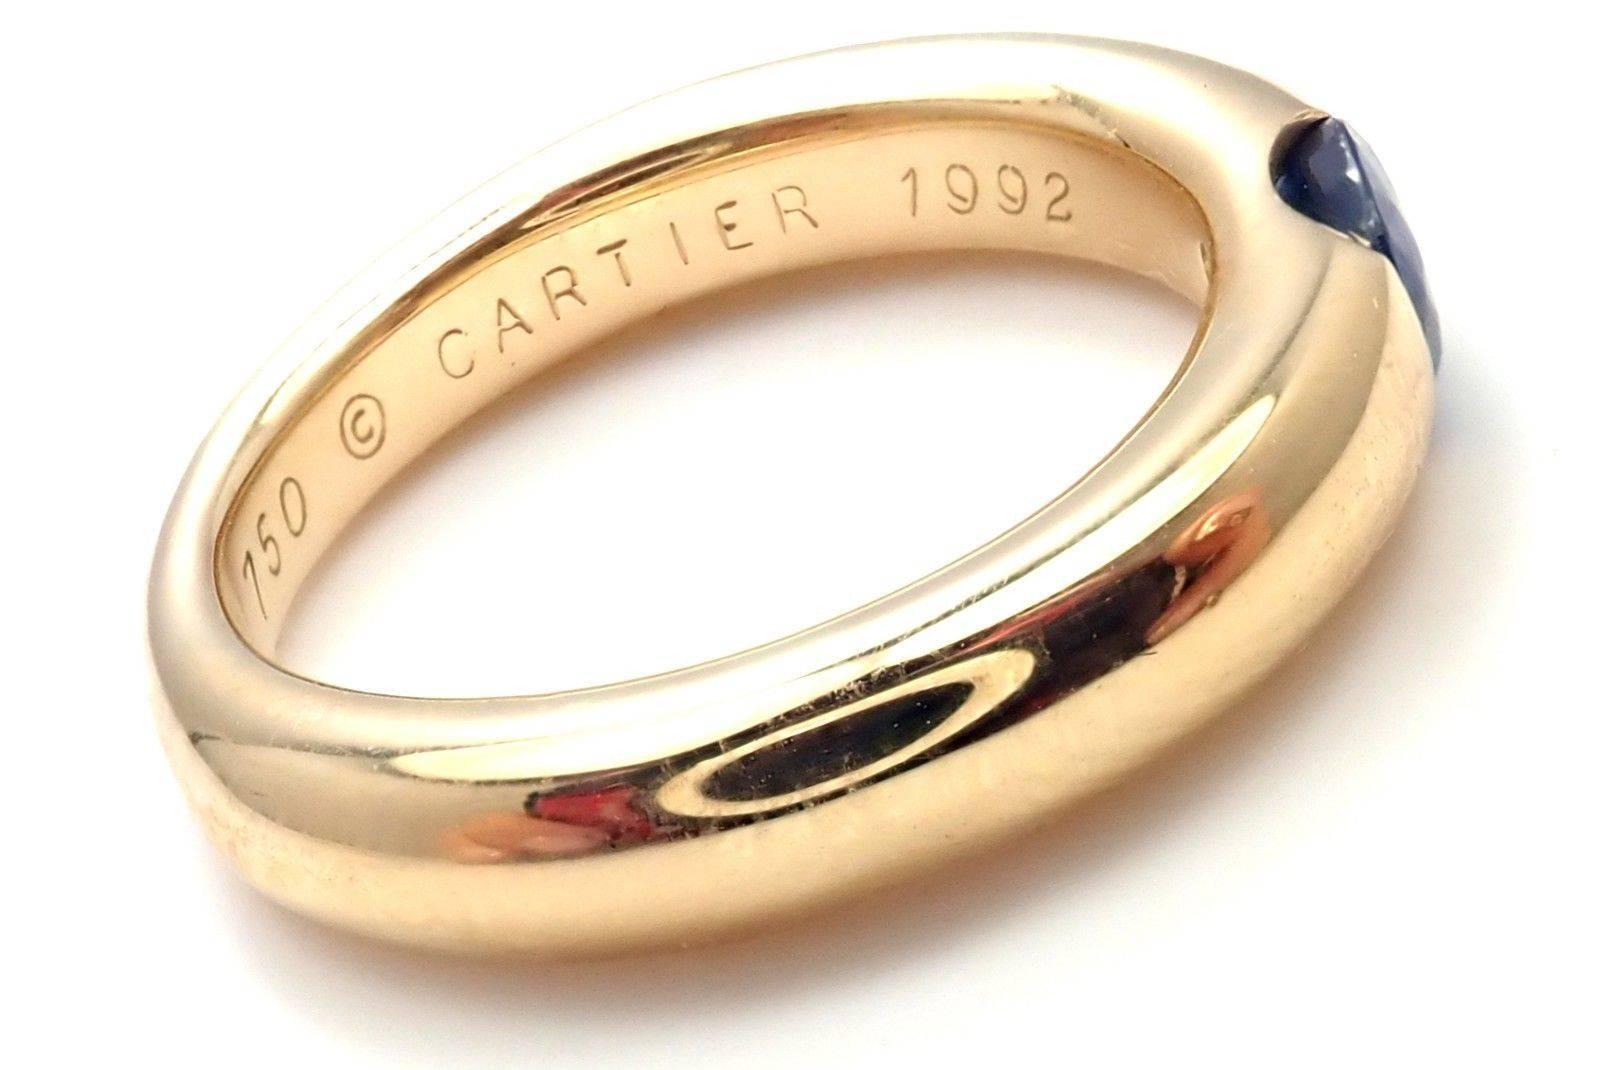 18k Yellow Gold Ellipse Sapphire Band Ring by Cartier.
With 1 oval-shaped beautiful sapphire 5mm x 4mm.
Details:
Width: 4mm
Weight: 9 grams
Ring Size: 6, Europe 52
Stamped Hallmarks: Cartier 750 52 D10662 1992
*Free Shipping within the United